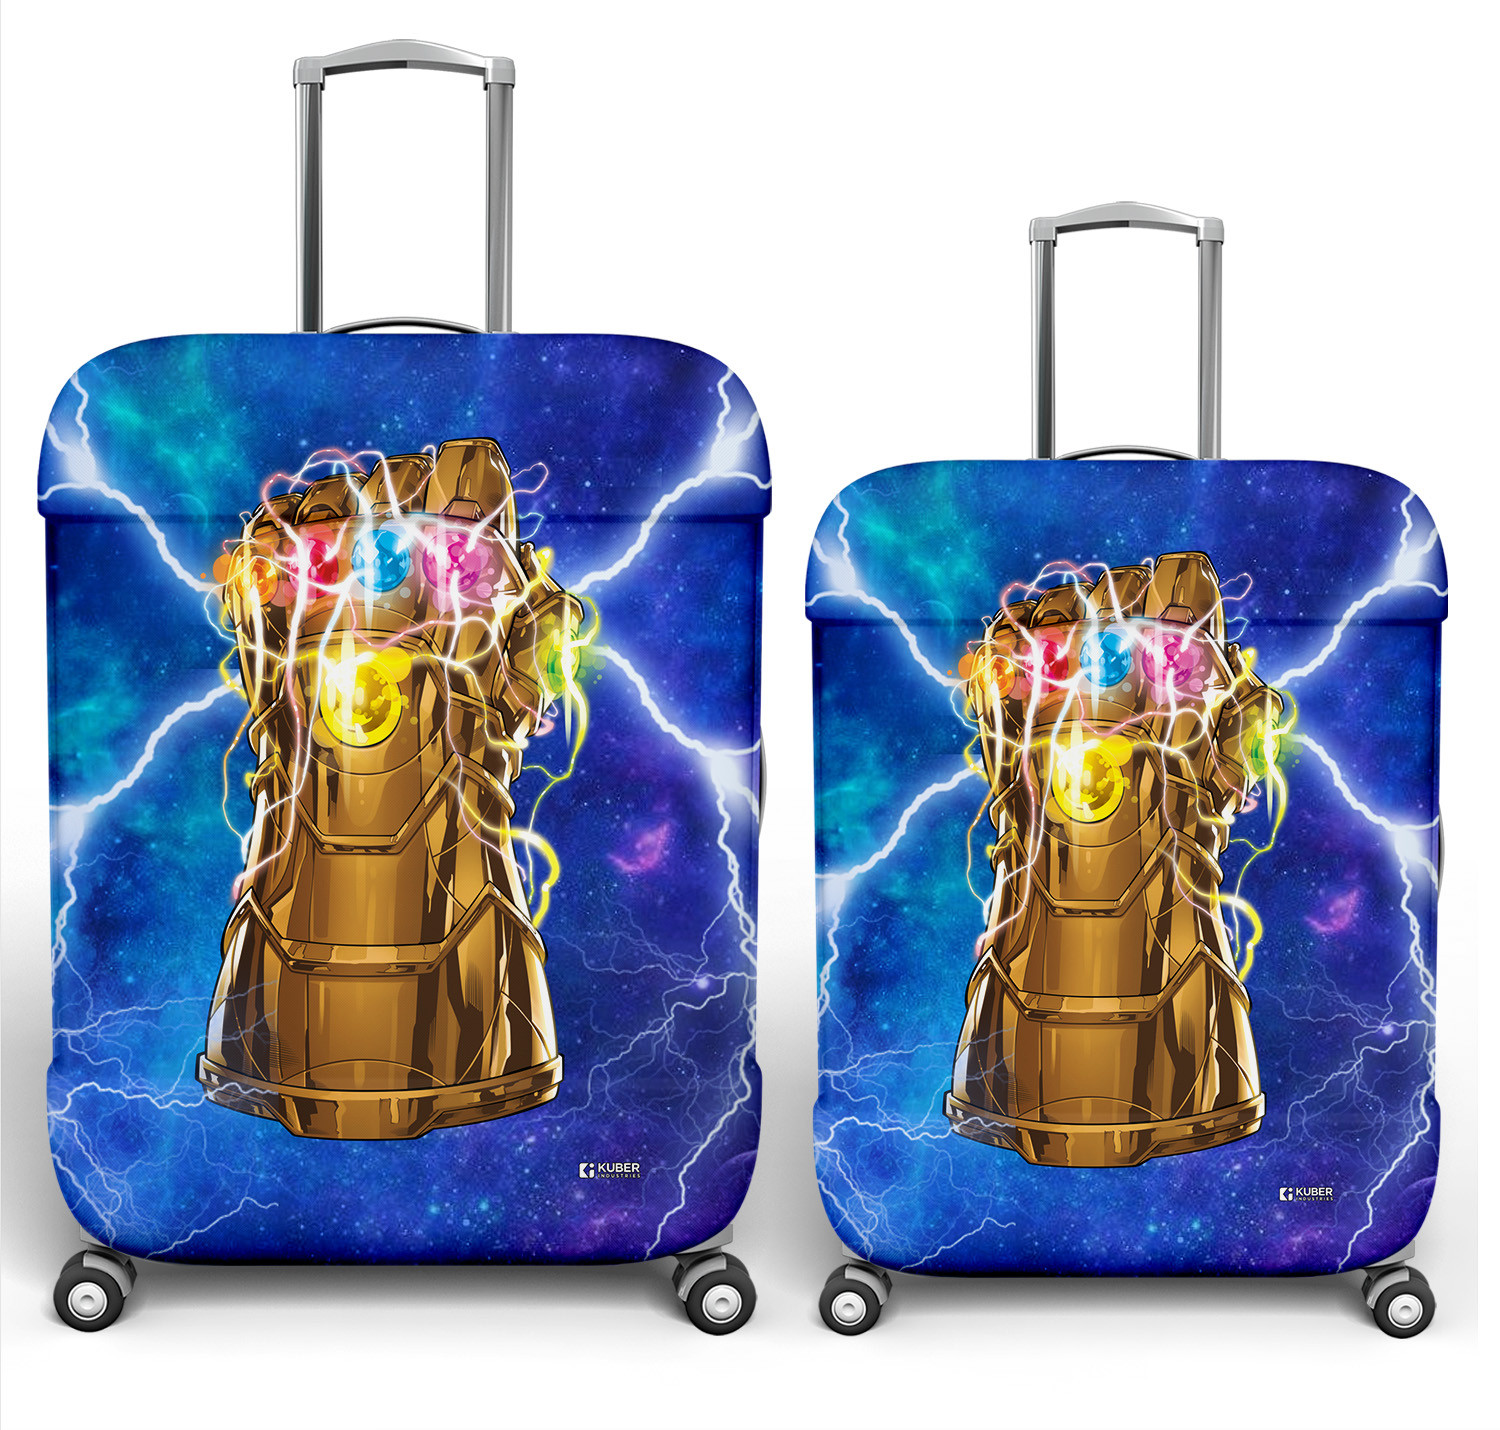 Kuber Industries Marvel The Infinity Gauntlet Luggage Cover|Polyester Travel Suitcase Cover|Washable|Stretchable Suitcase Cover|22-26 Inch-Medium|26-30 Inch-Large|Pack of 2 (Sky Blue)